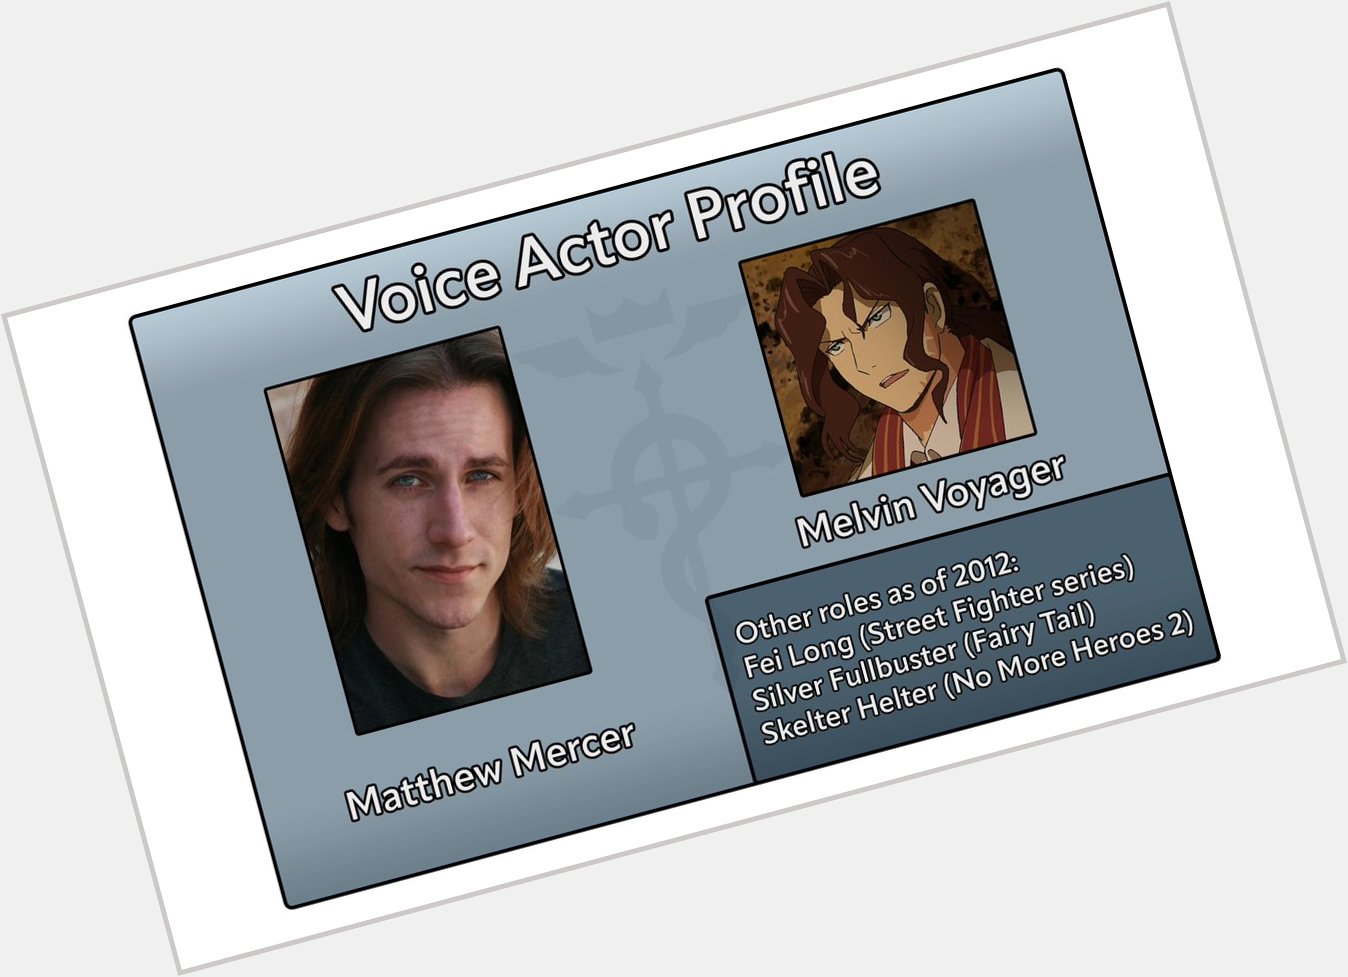 Happy day late birthday to Matthew Mercer.

Oh, right, he did a thing in Fullmetal, didn\t he? 